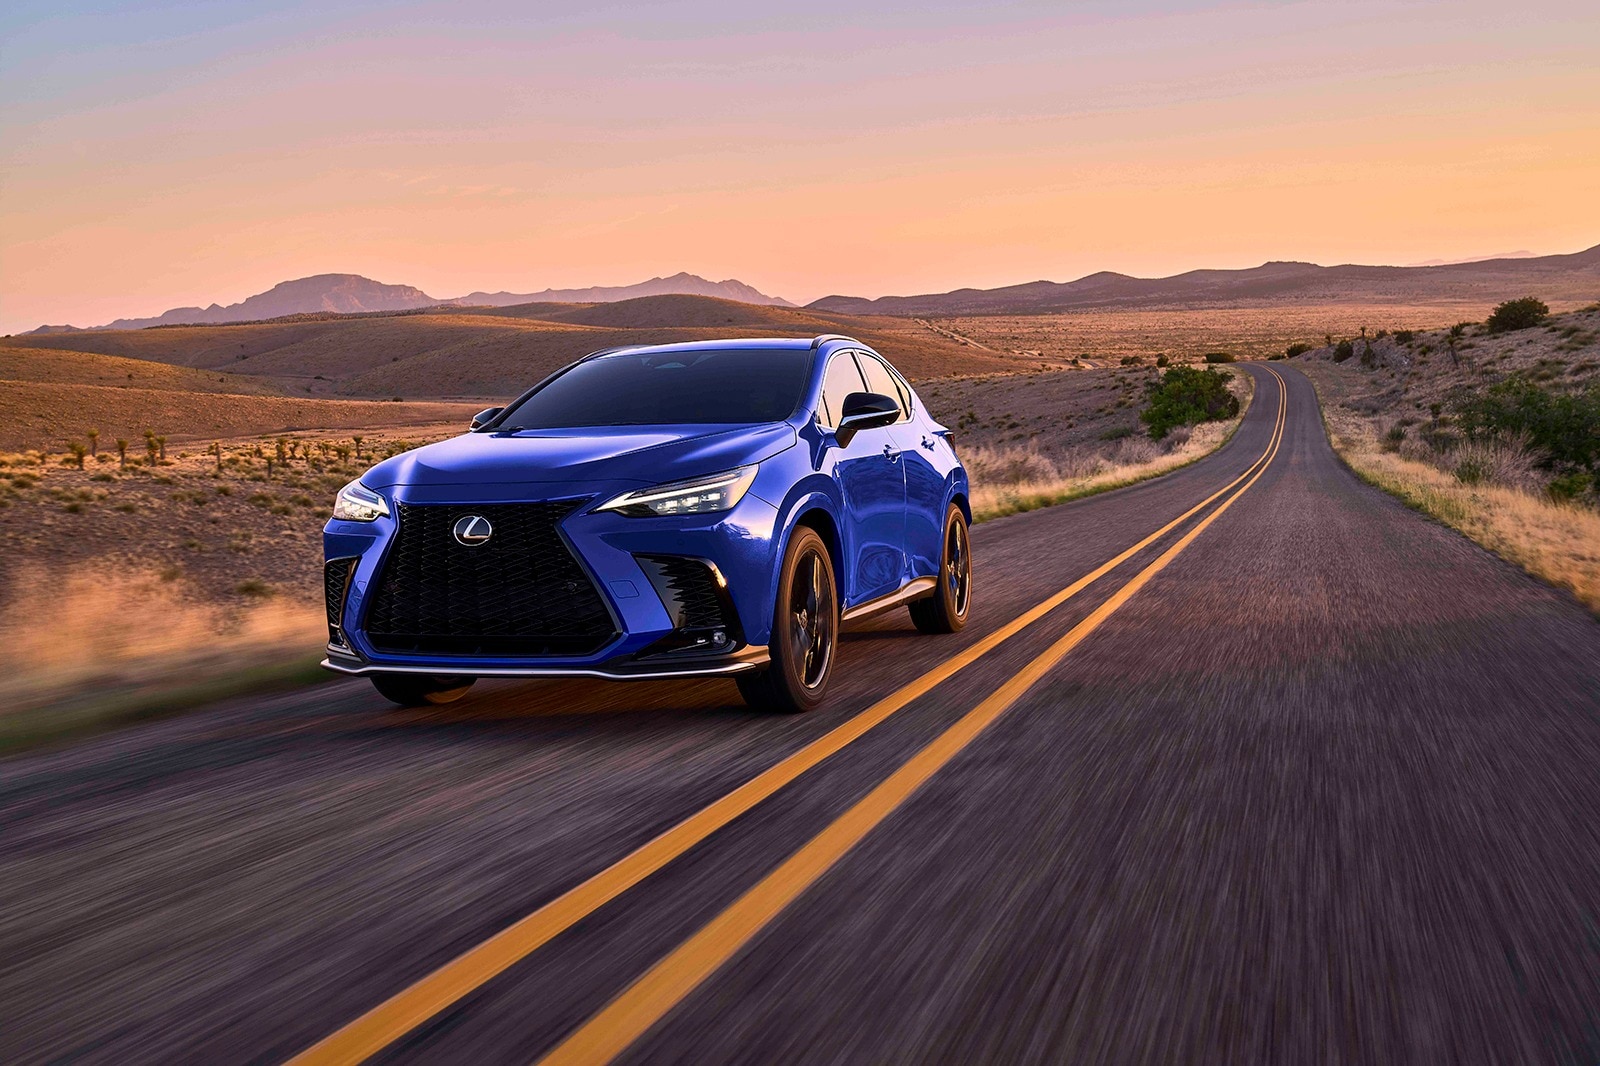 2022 Lexus NX 450h+ is a Plug-In Hybrid SUV with a 0-60 MPH Time of 6 Seconds and 36 Miles of Range